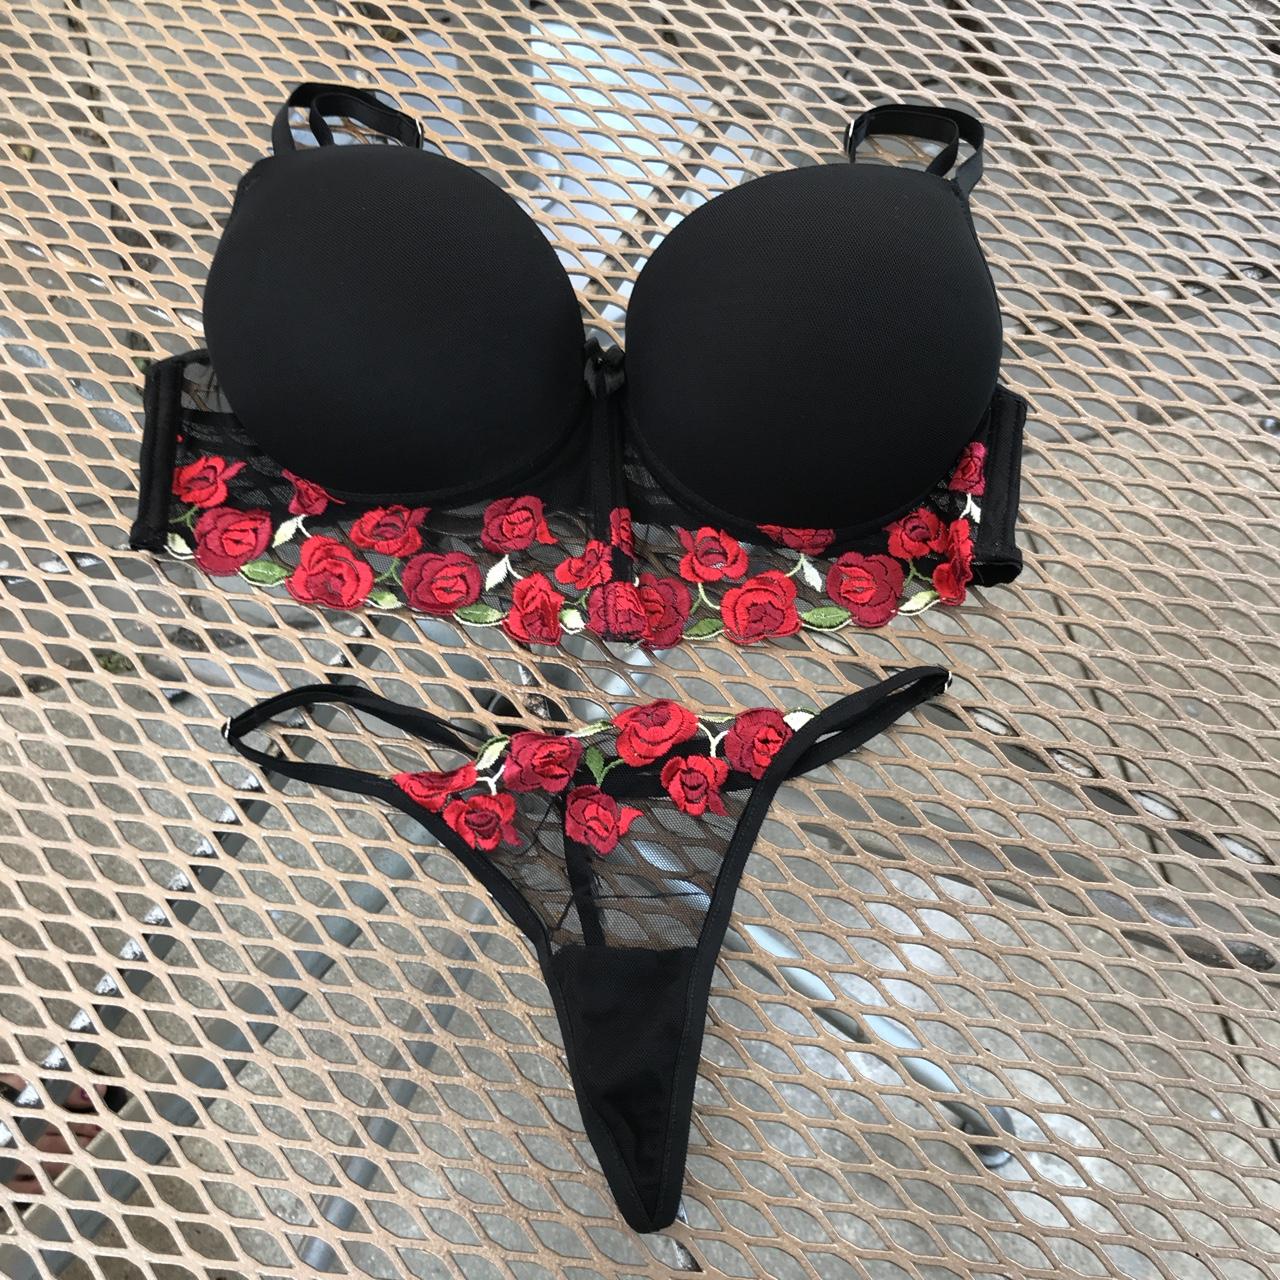 Bra and thong panty set. Have 2, bra size 34B and a - Depop